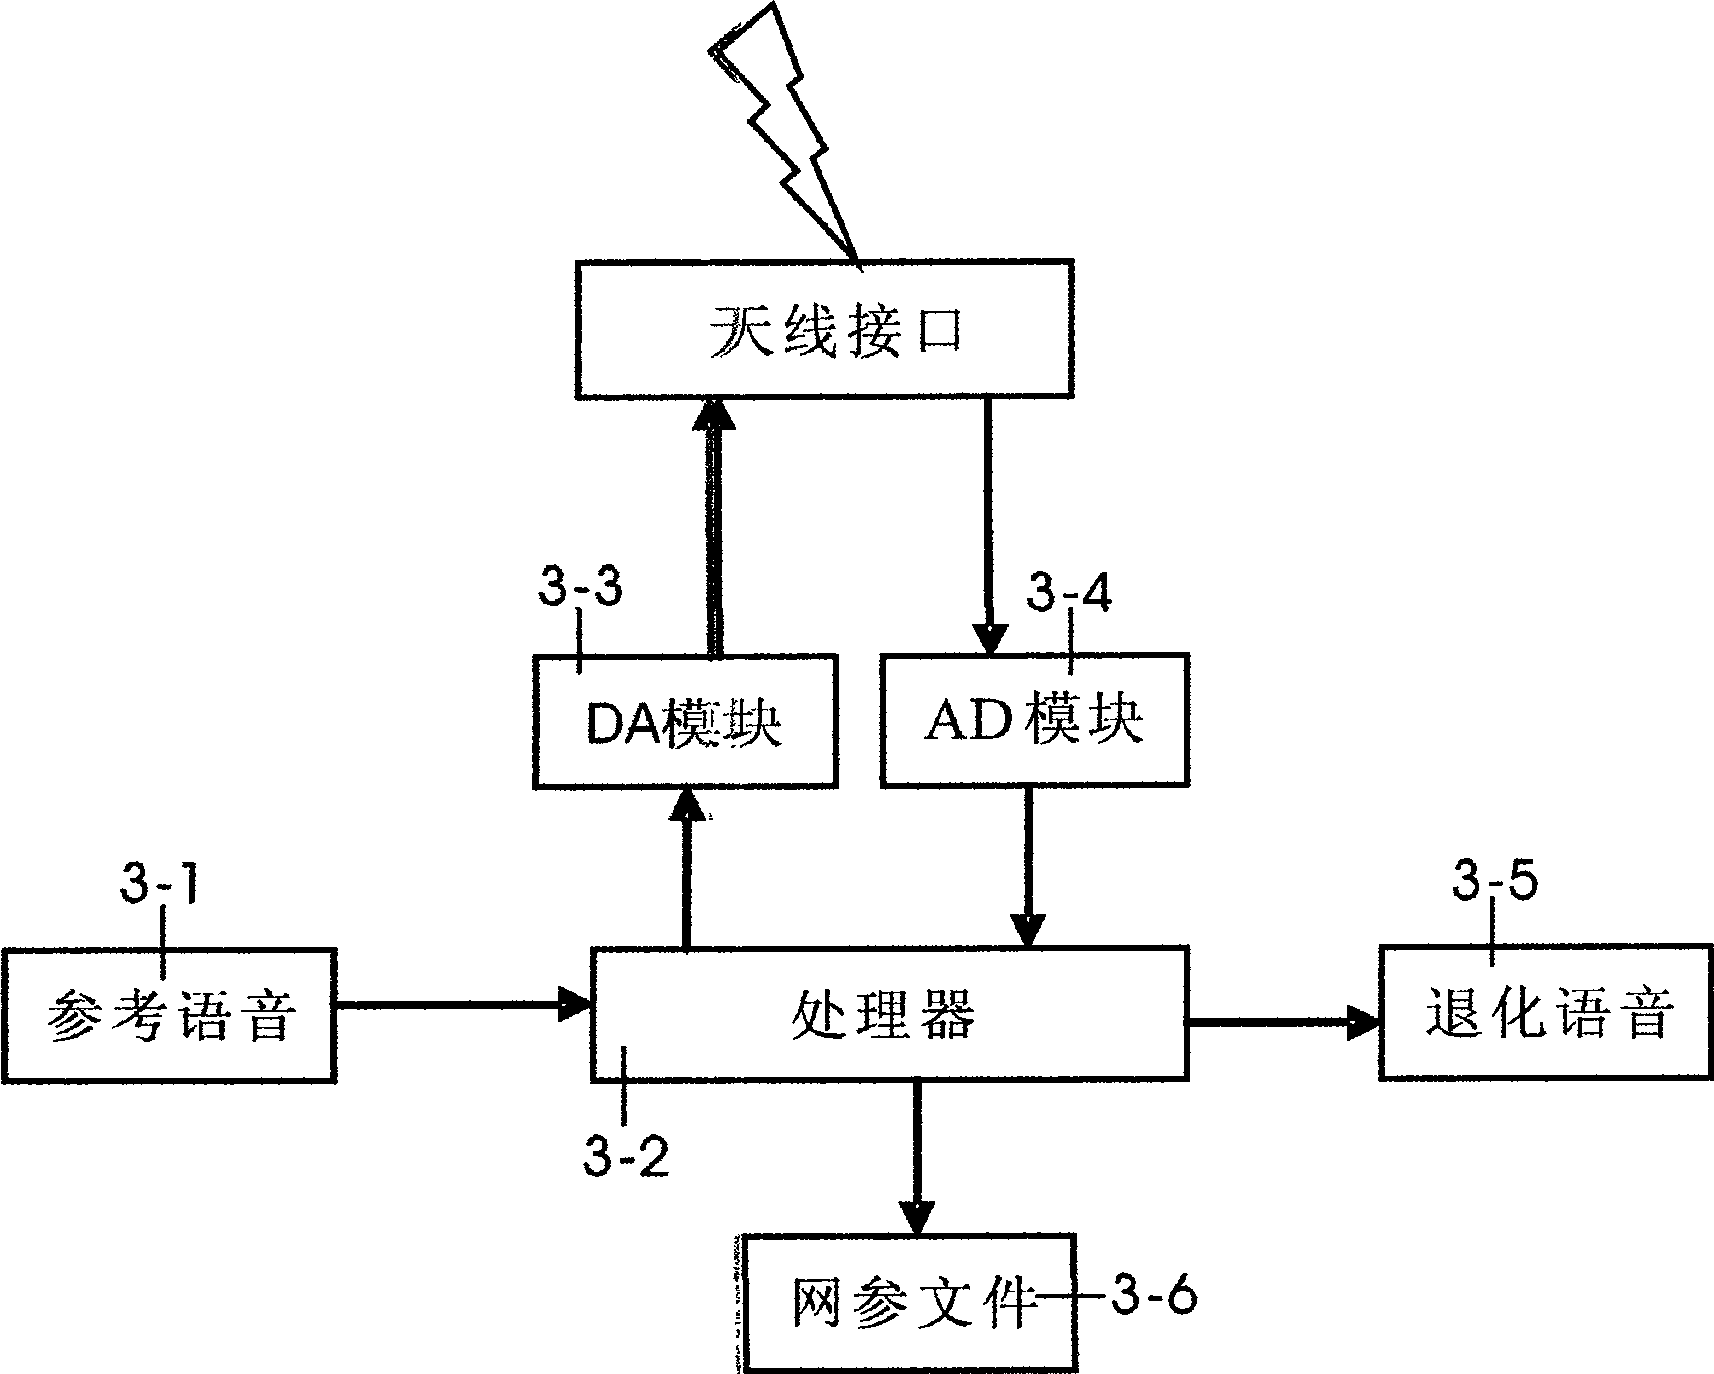 Speech quality evaluation system of mobile communication network